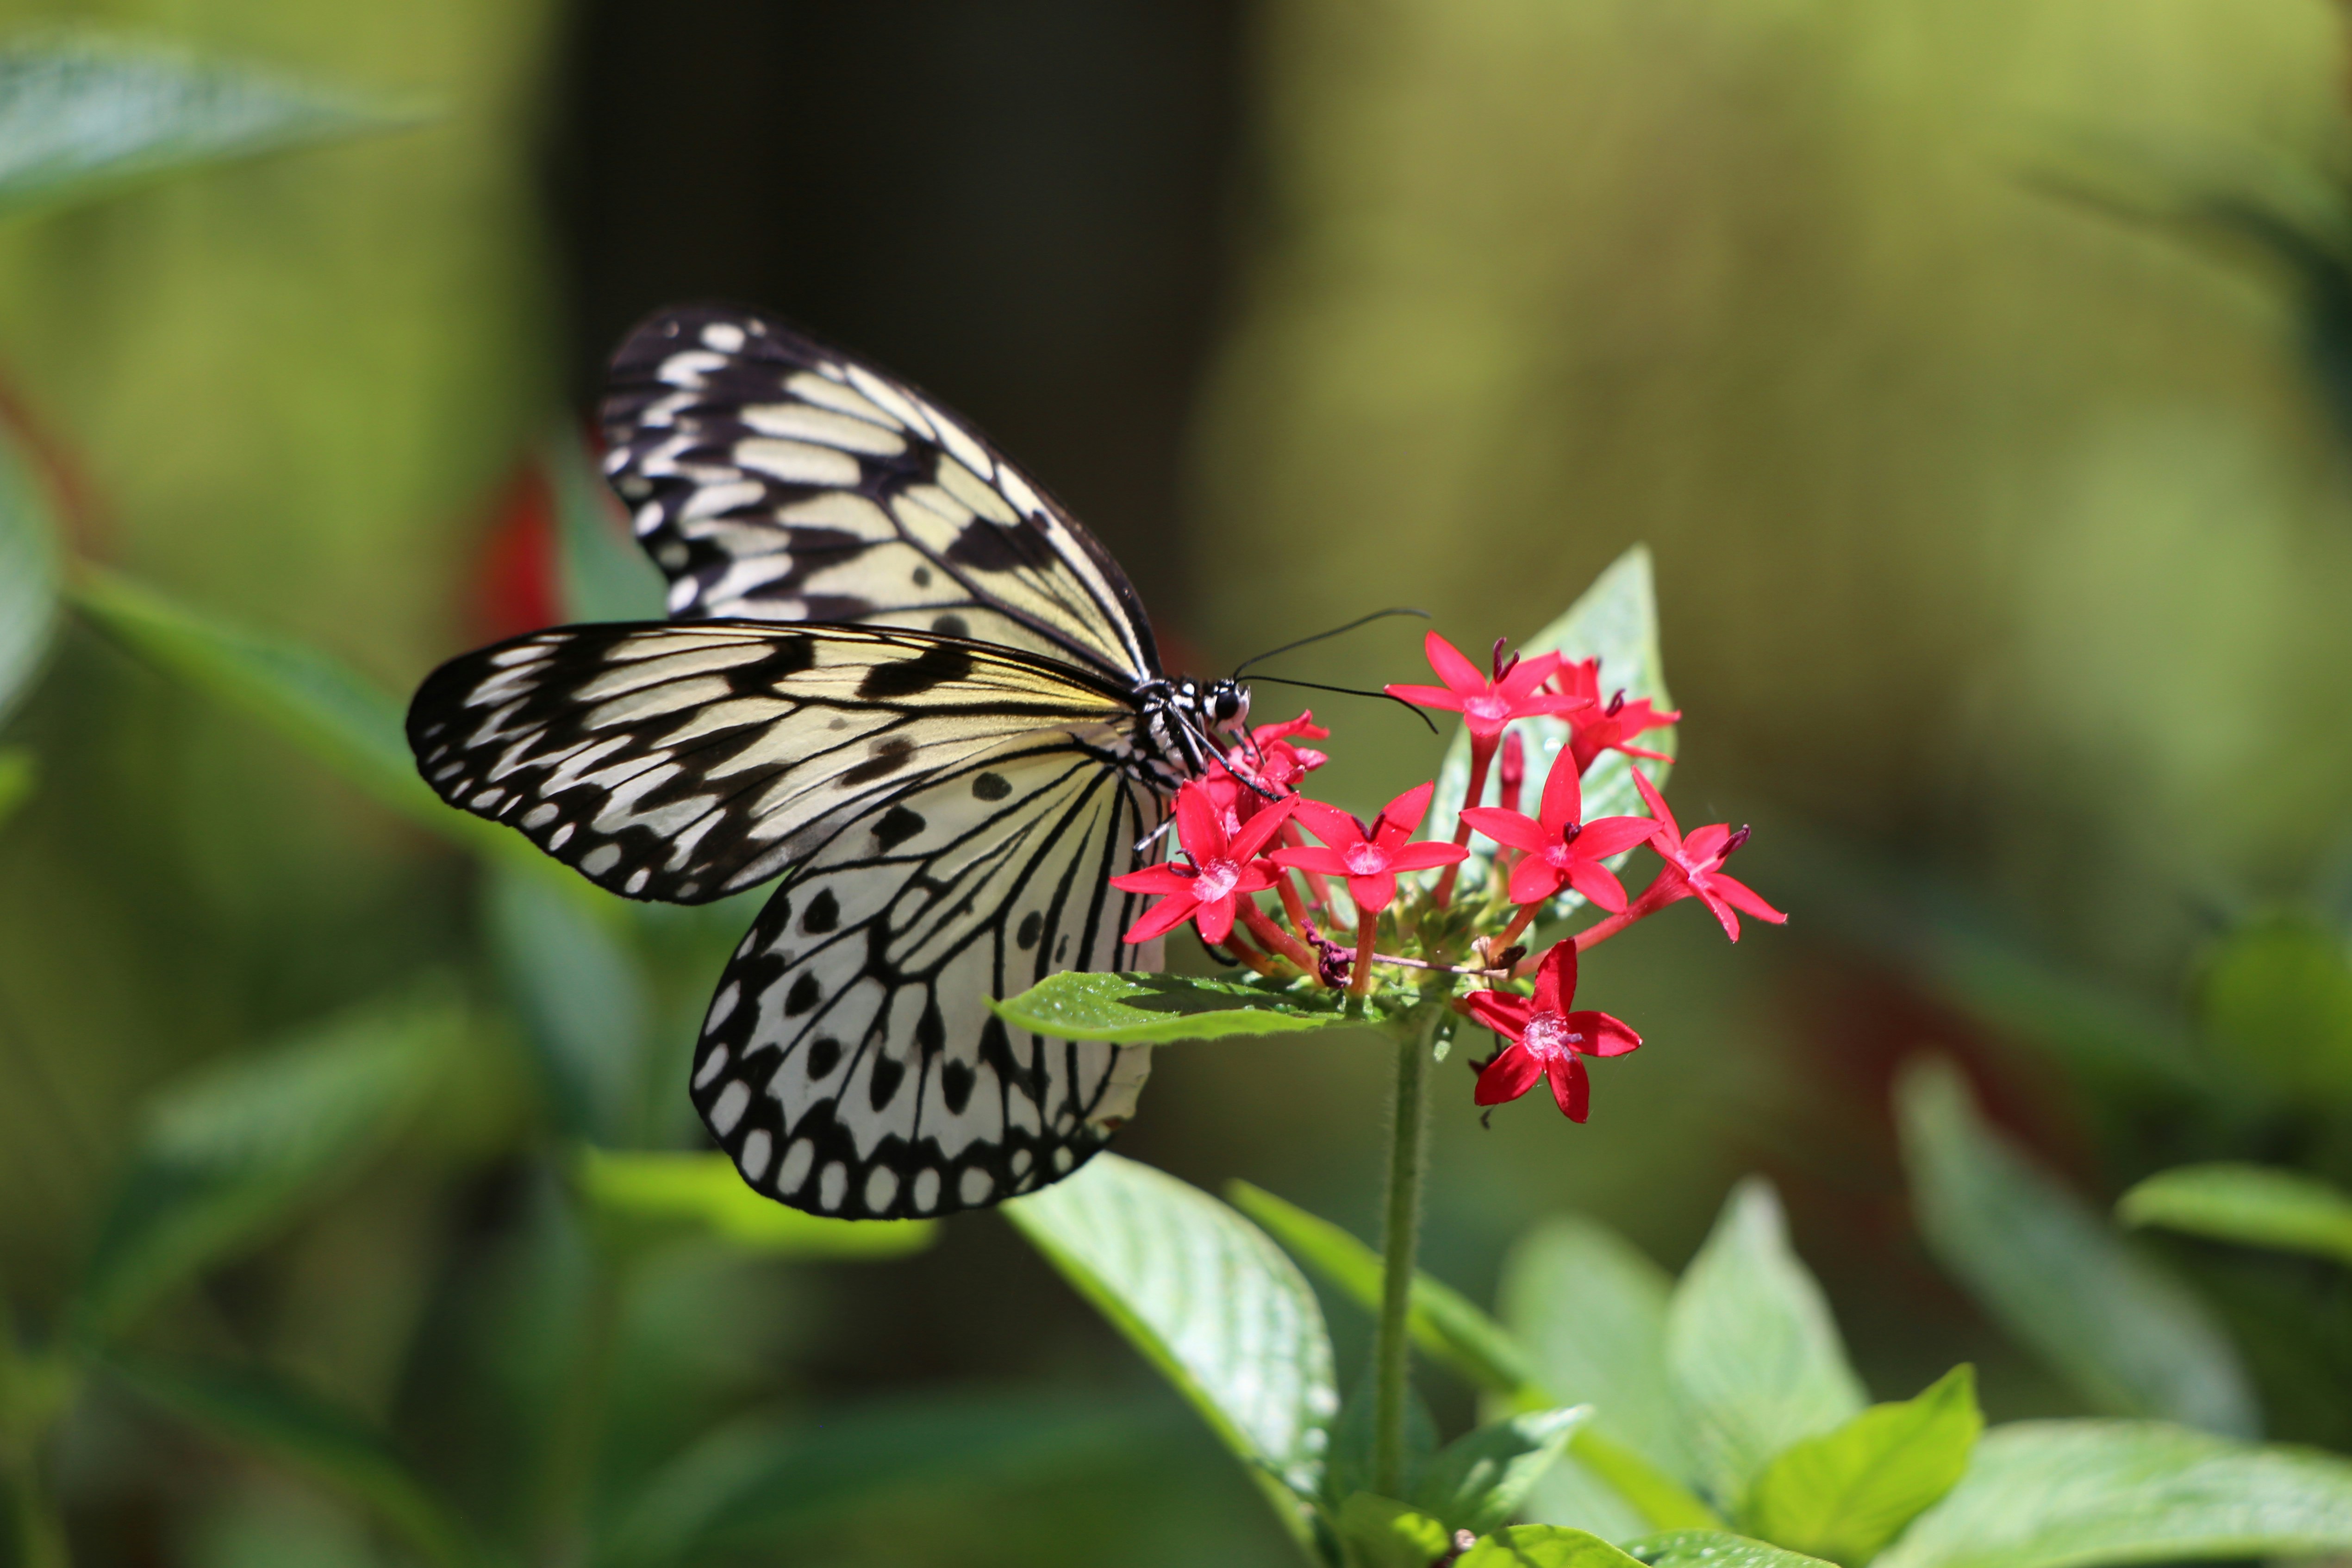 black and white butterfly perched on red flower in close up photography during daytime